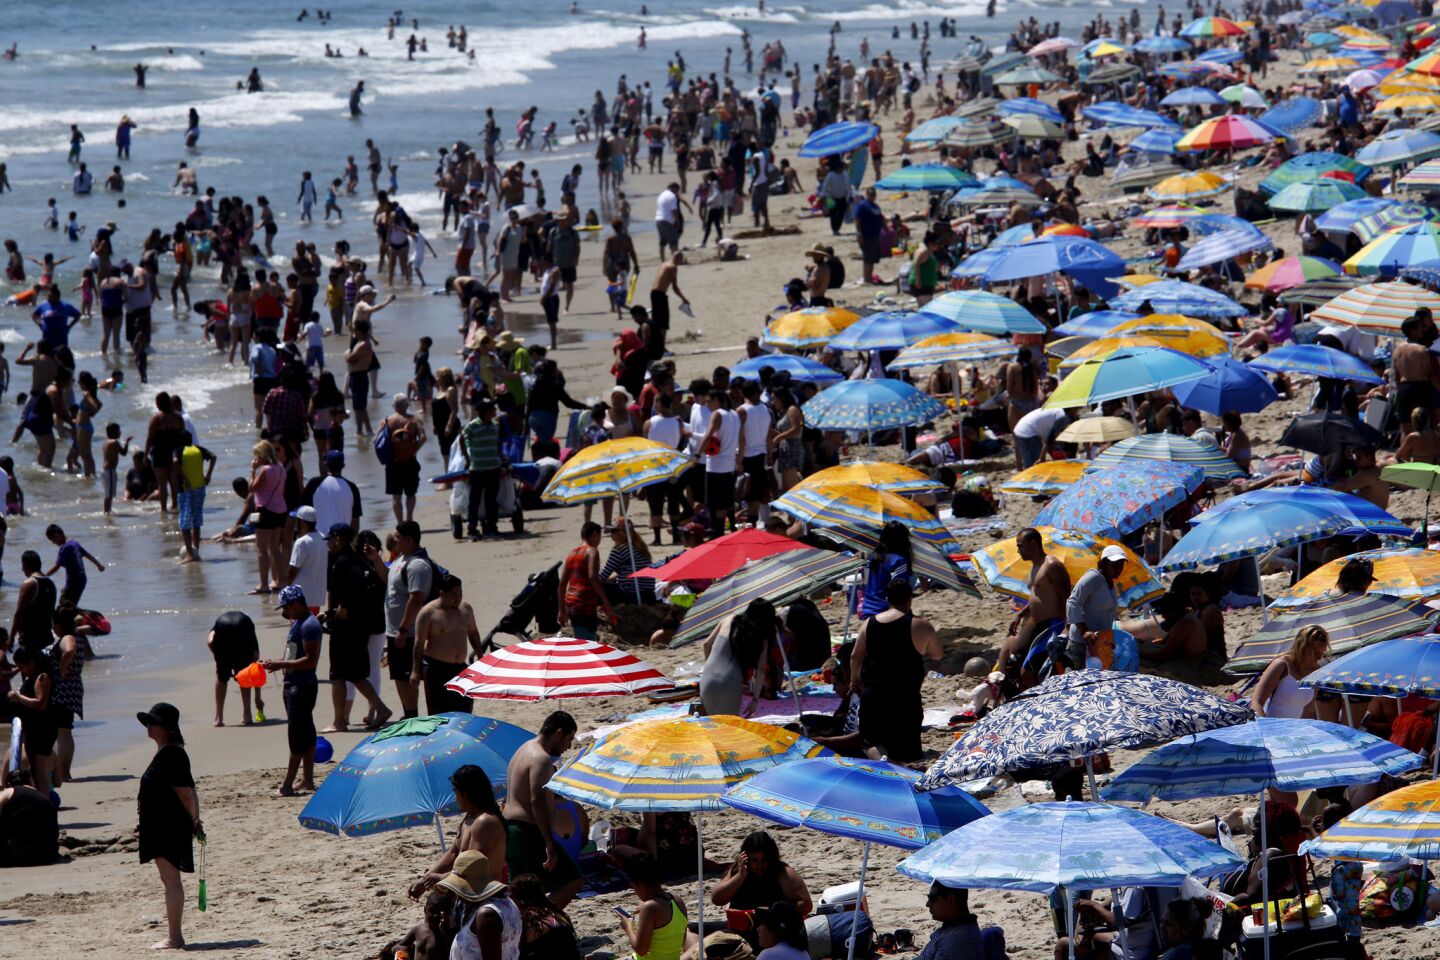 With temperatures soaring, crowds flock to the beach on the north side of the Santa Monica Pier in Santa Monica.